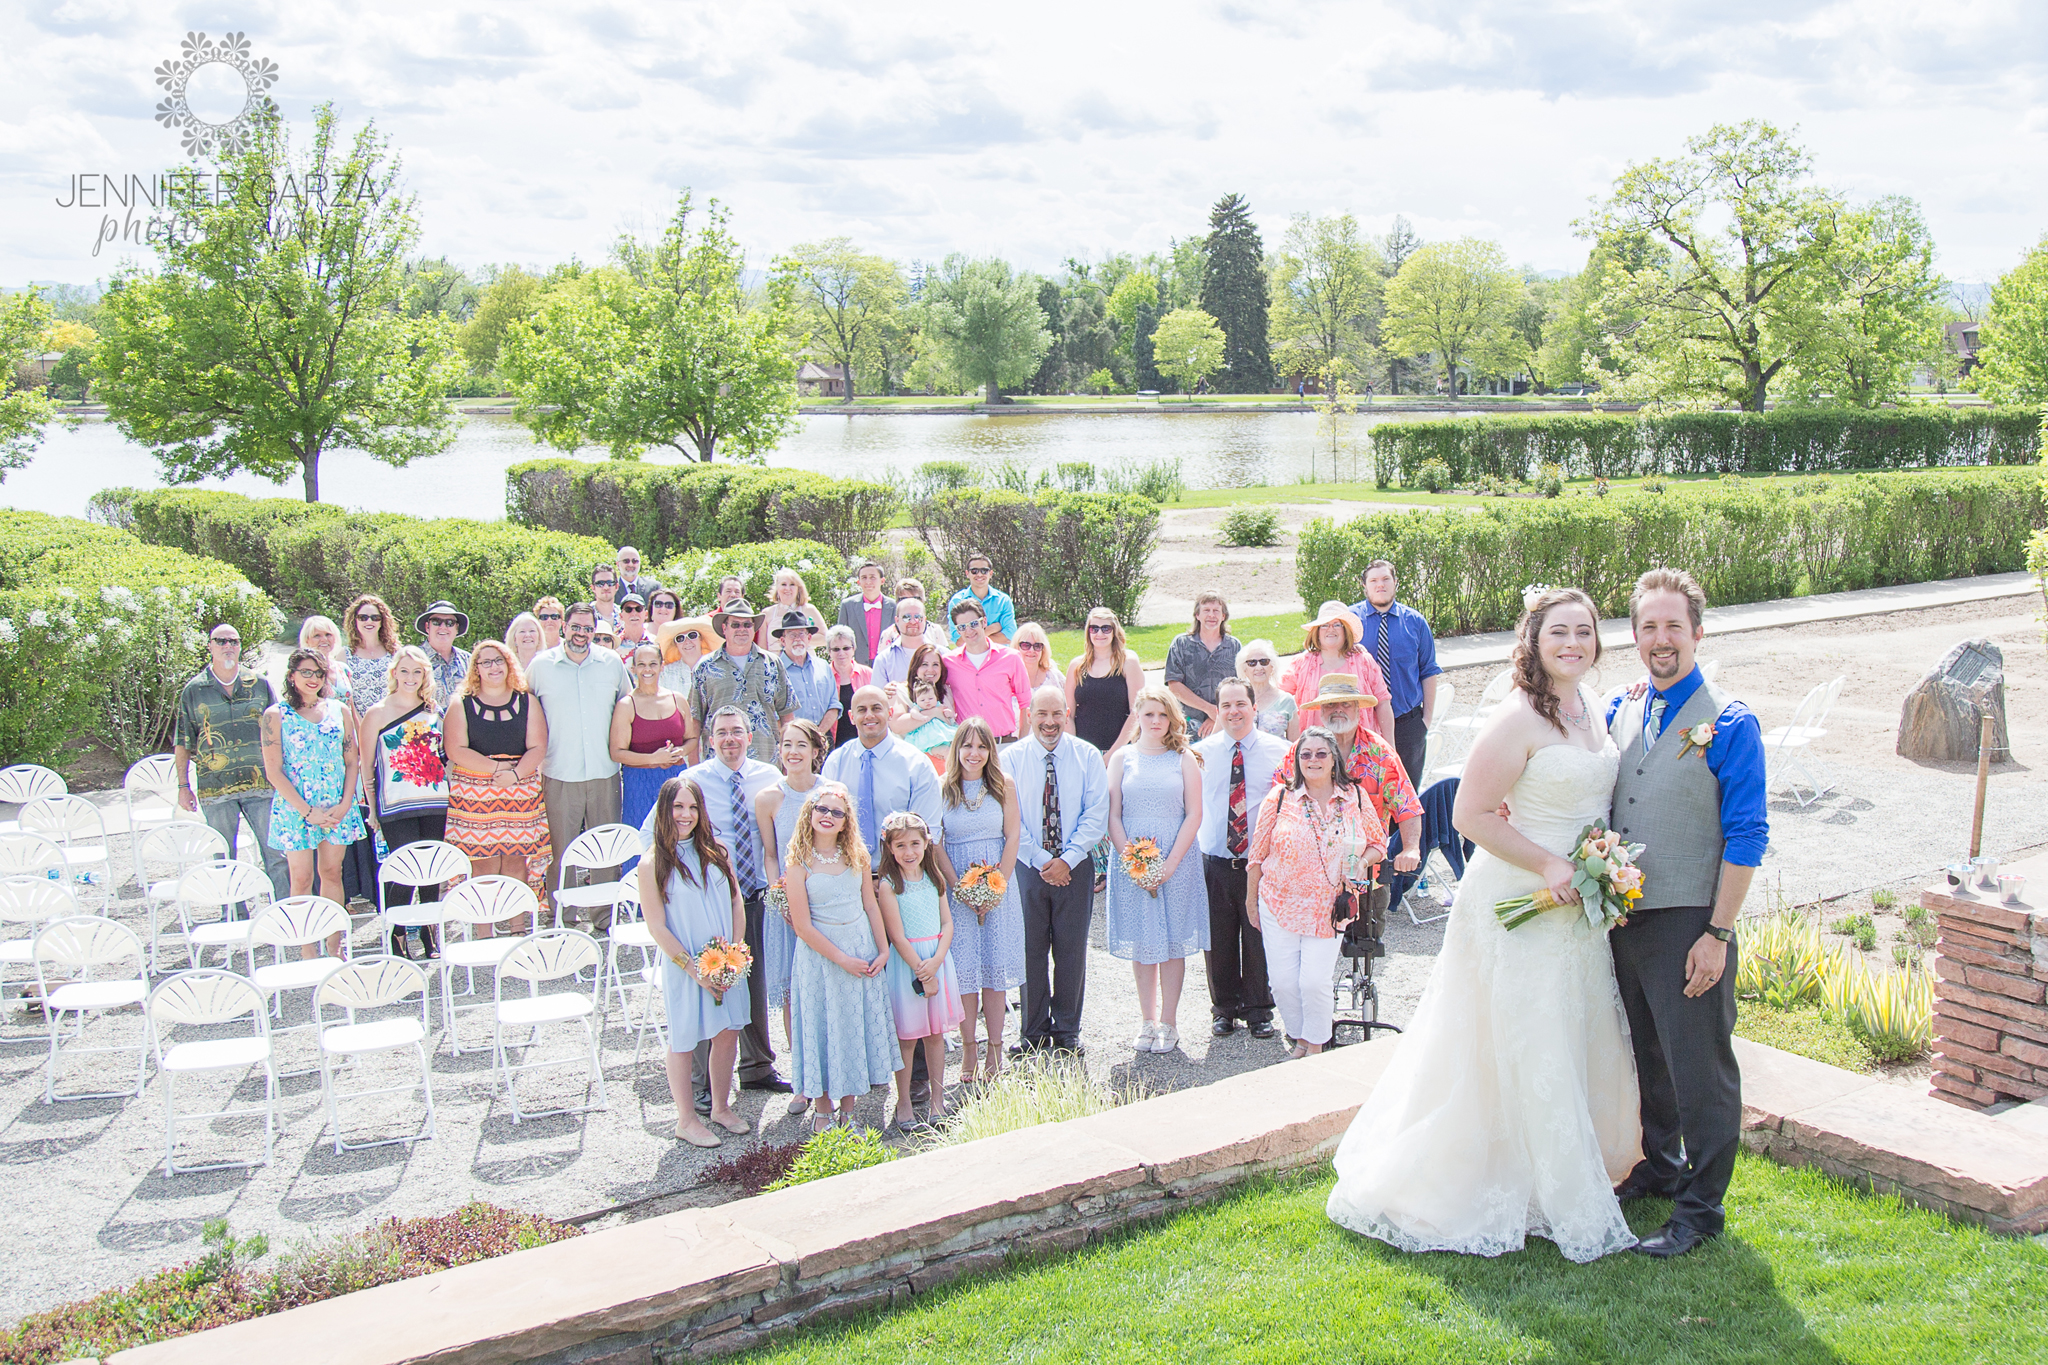 Large group photo of Bride & Groom's with their guests behind them during a summer wedding ceremony in the park. Rachael & Wes' Wash Park and Irish Rover Pub Denver Wedding by Colorado Wedding Photographer, Jennifer Garza. Colorado Wedding Photographer, Denver Wedding Photographer, Colorado Wedding Photos, Denver Wedding Photos, Colorado Bride, Denver Bride, Wash Park Wedding, Wash Park, Irish Rover Pub, Irish Rover Pub Wedding, Pub Wedding, Park Wedding